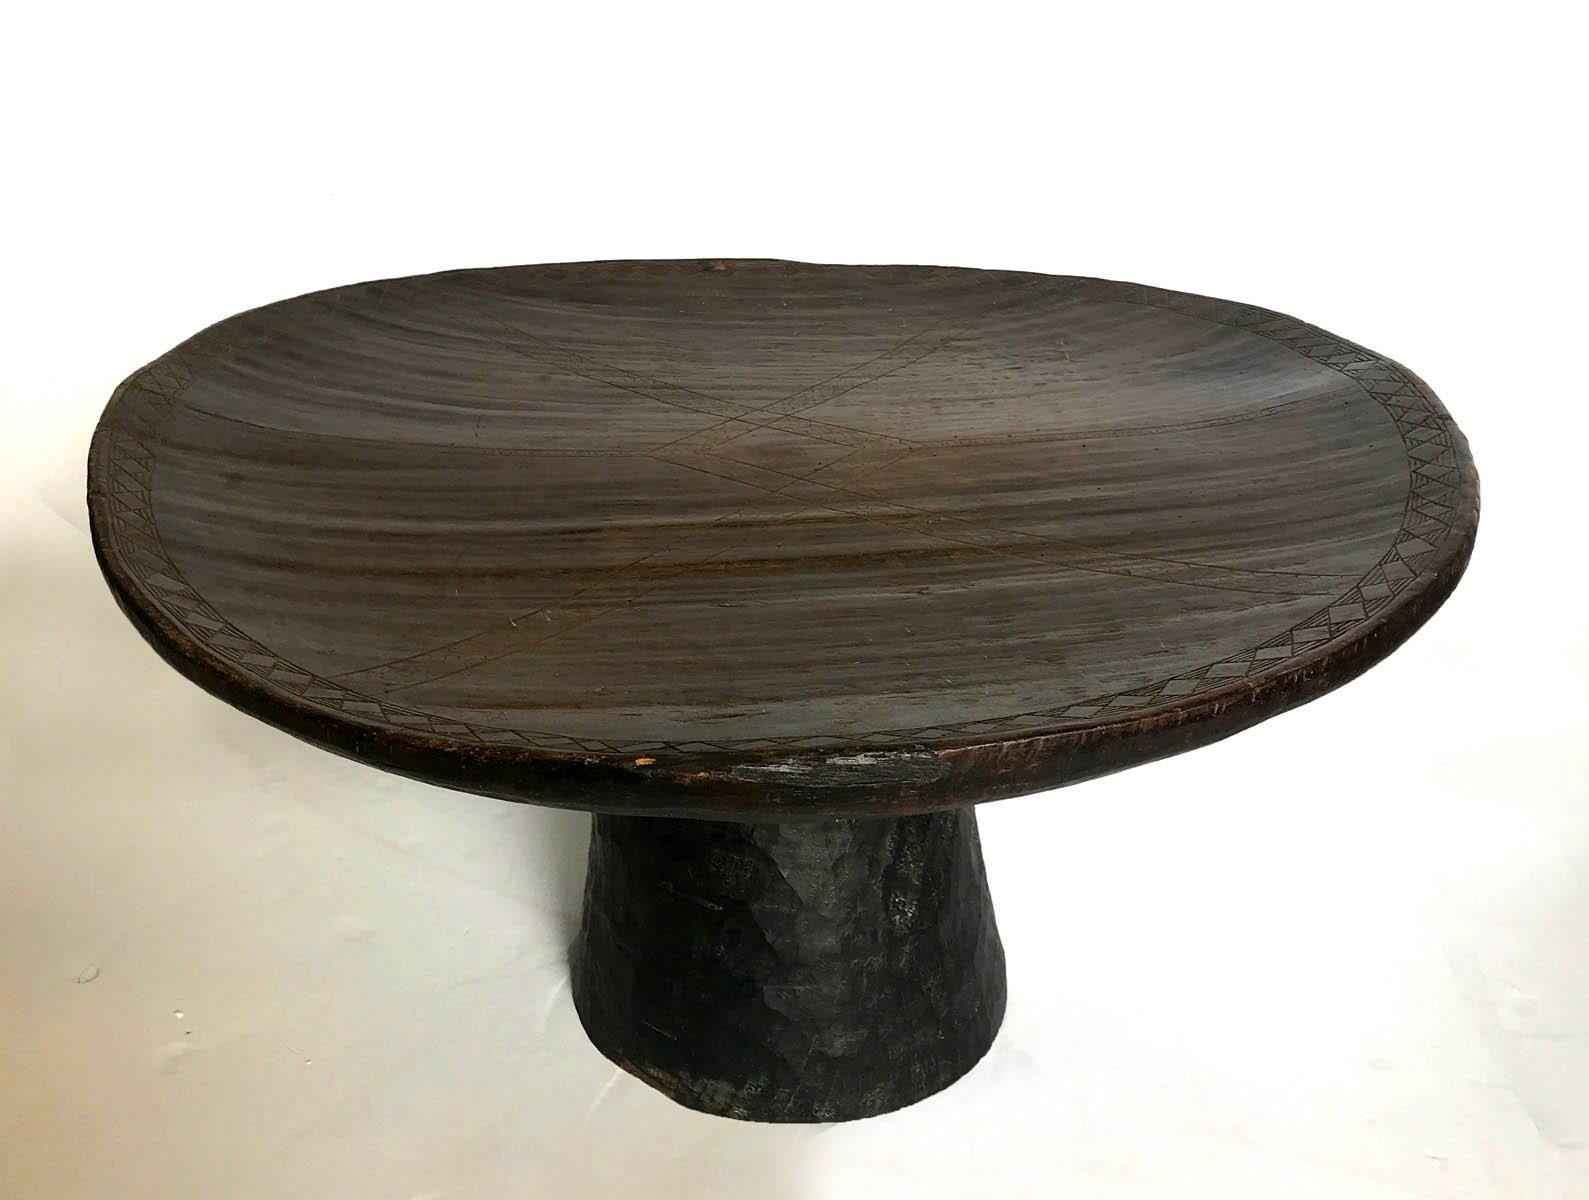 Dark, almost ebony color tribal table carved out of one piece of wood. It has intricate carved details on top. Top is somewhat bowl like in shape and uneven as it was hand carved. Height varies from about 16-18 inches around the edges. Beautiful